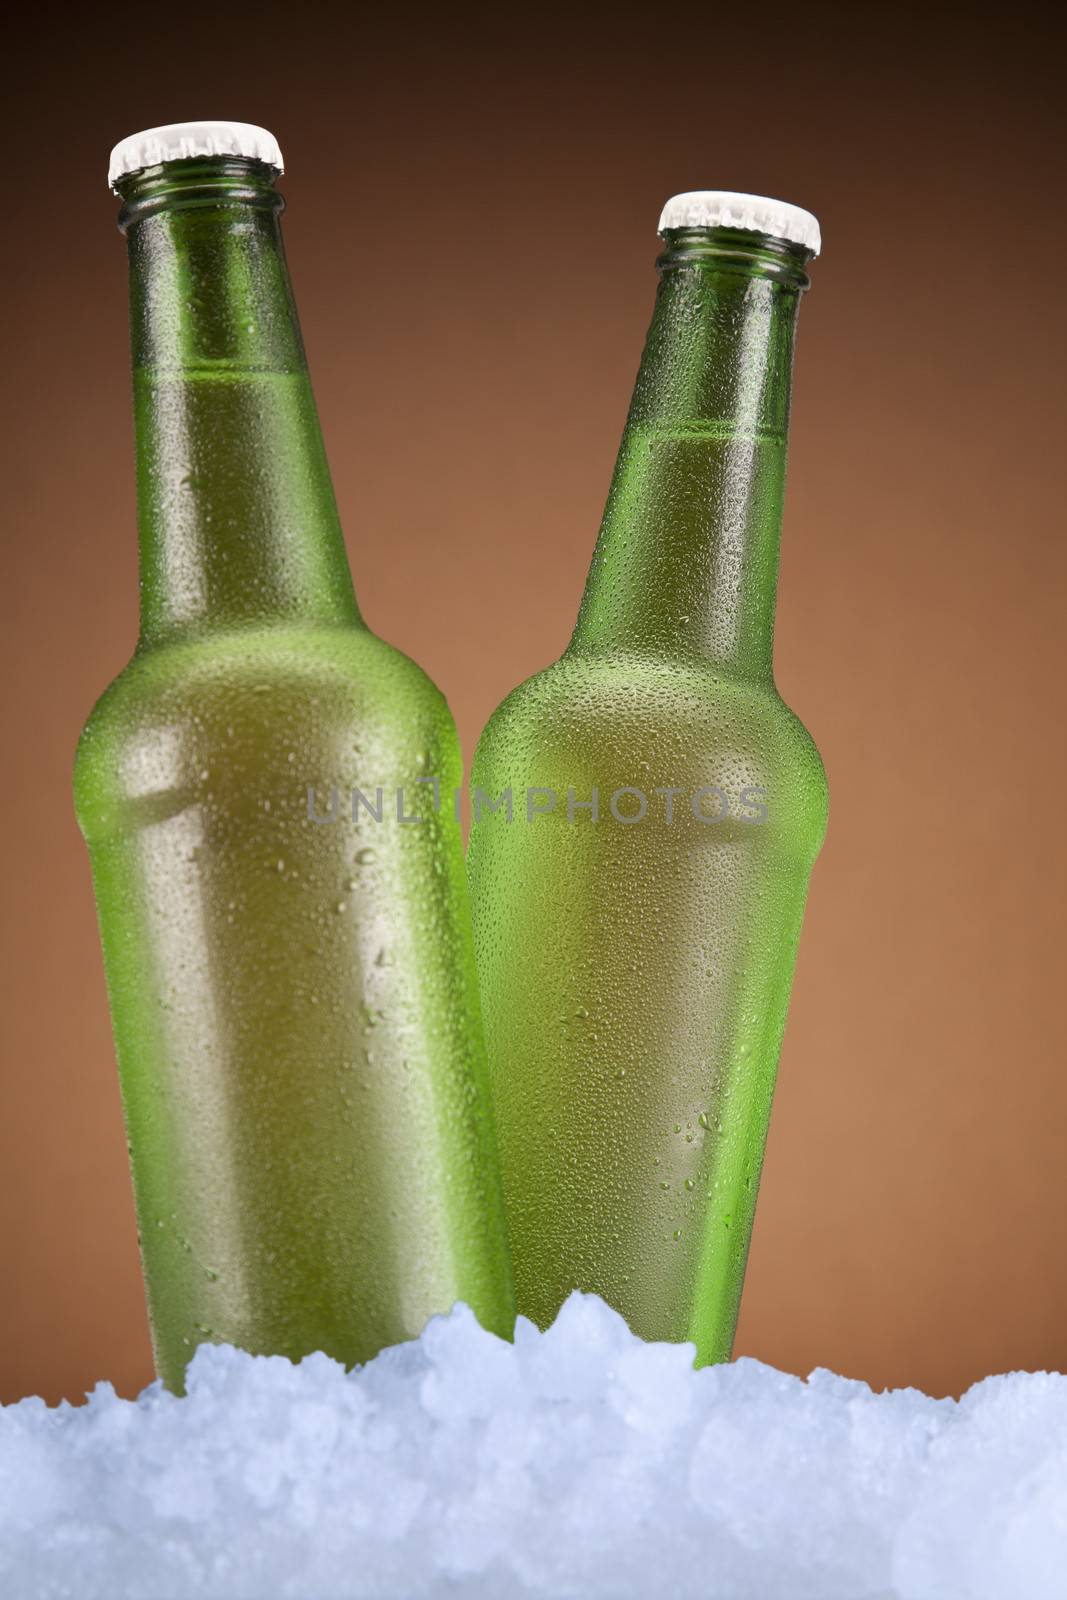 Two green beer bottles sitting on ice over a brown background.